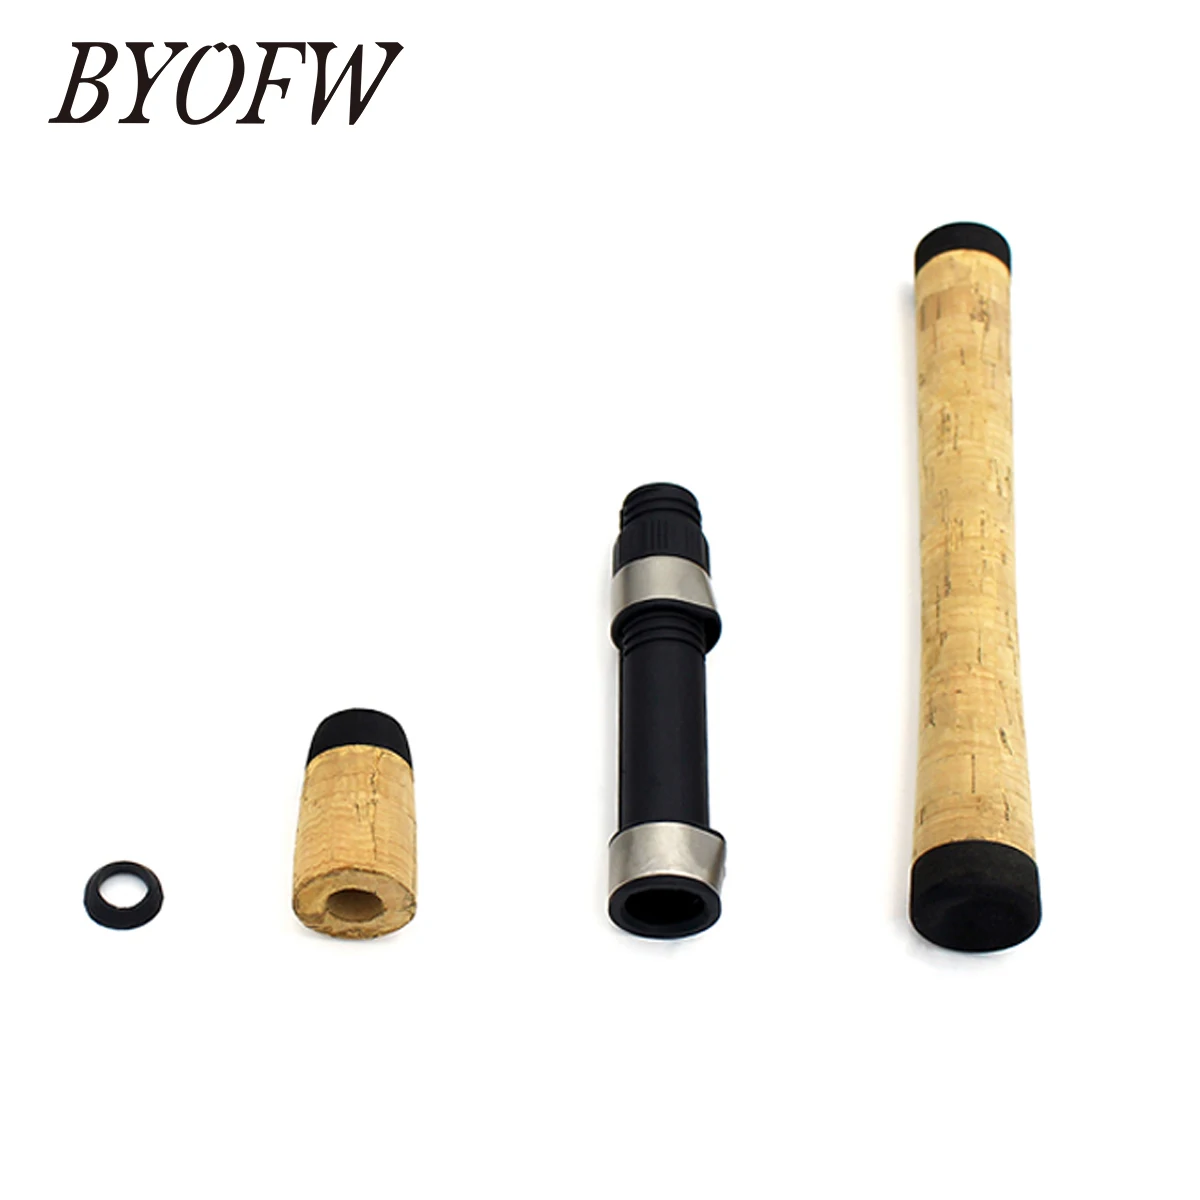 https://ae01.alicdn.com/kf/S6285e78ccefd4341959c04a266735f63l/BYOFW-1-Set-Composite-Cork-Spinning-Fishing-Rod-Handle-For-Pole-Building-Grip-With-16-DPS.jpg